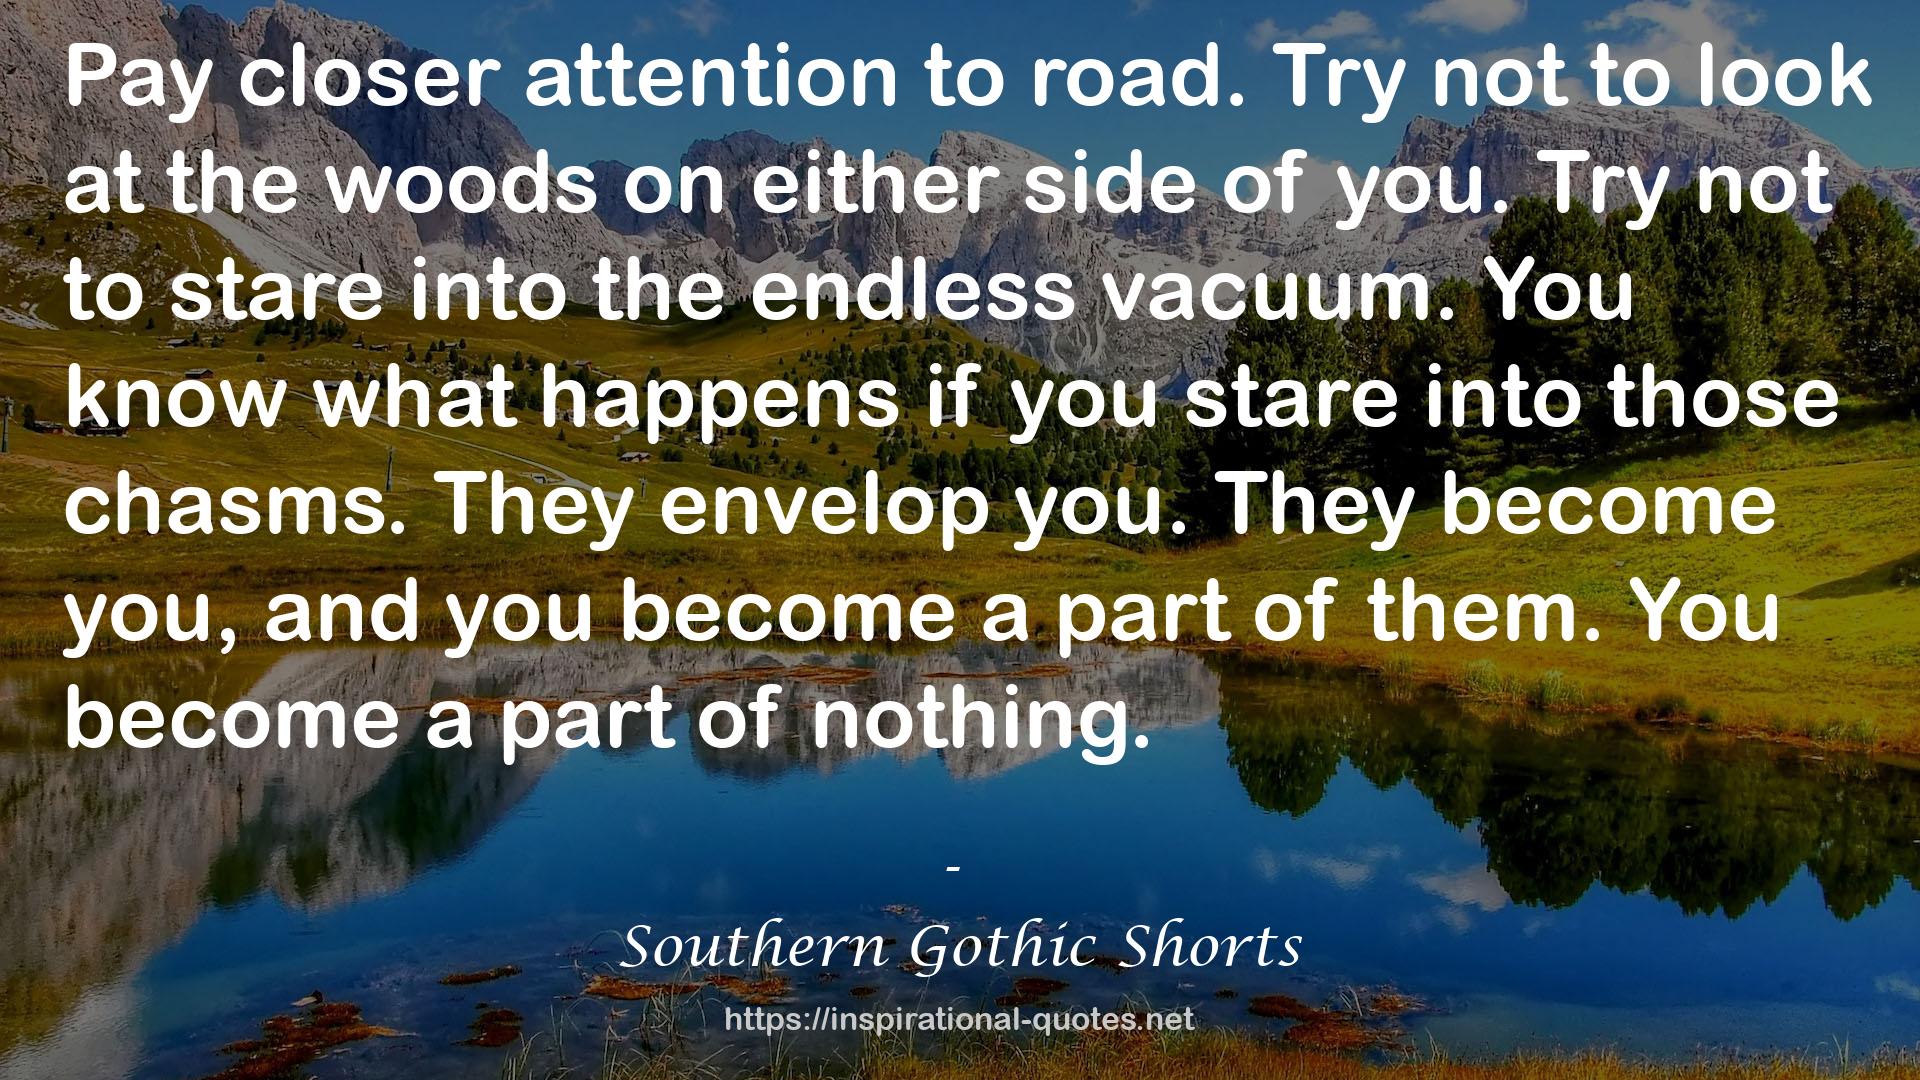 Southern Gothic Shorts QUOTES